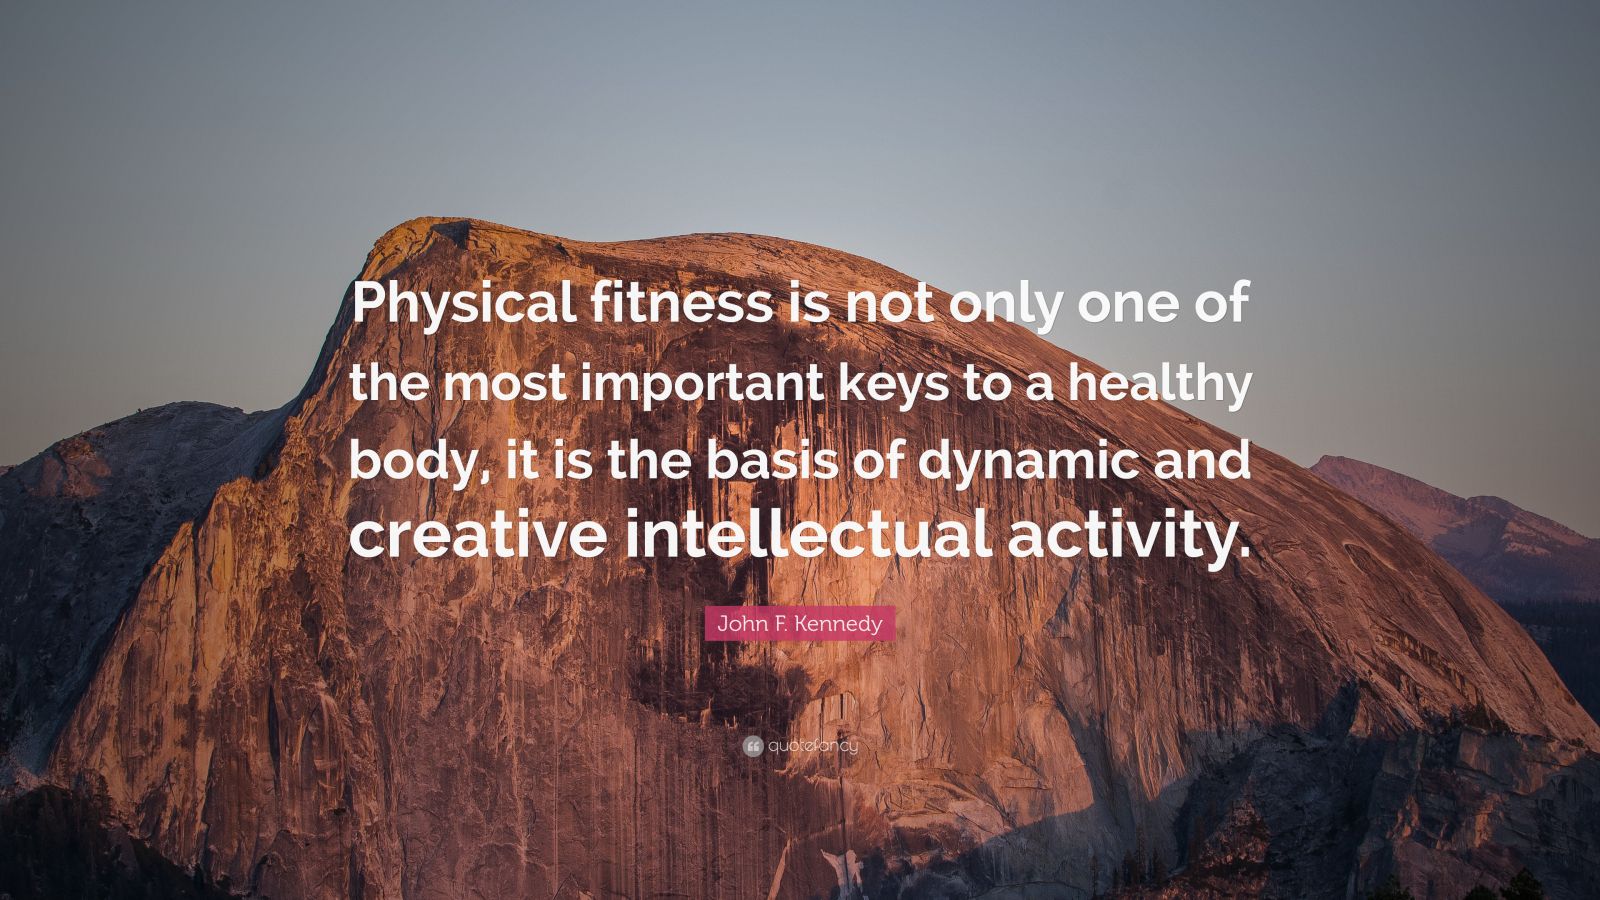 John F. Kennedy Quote: “Physical fitness is not only one of the most